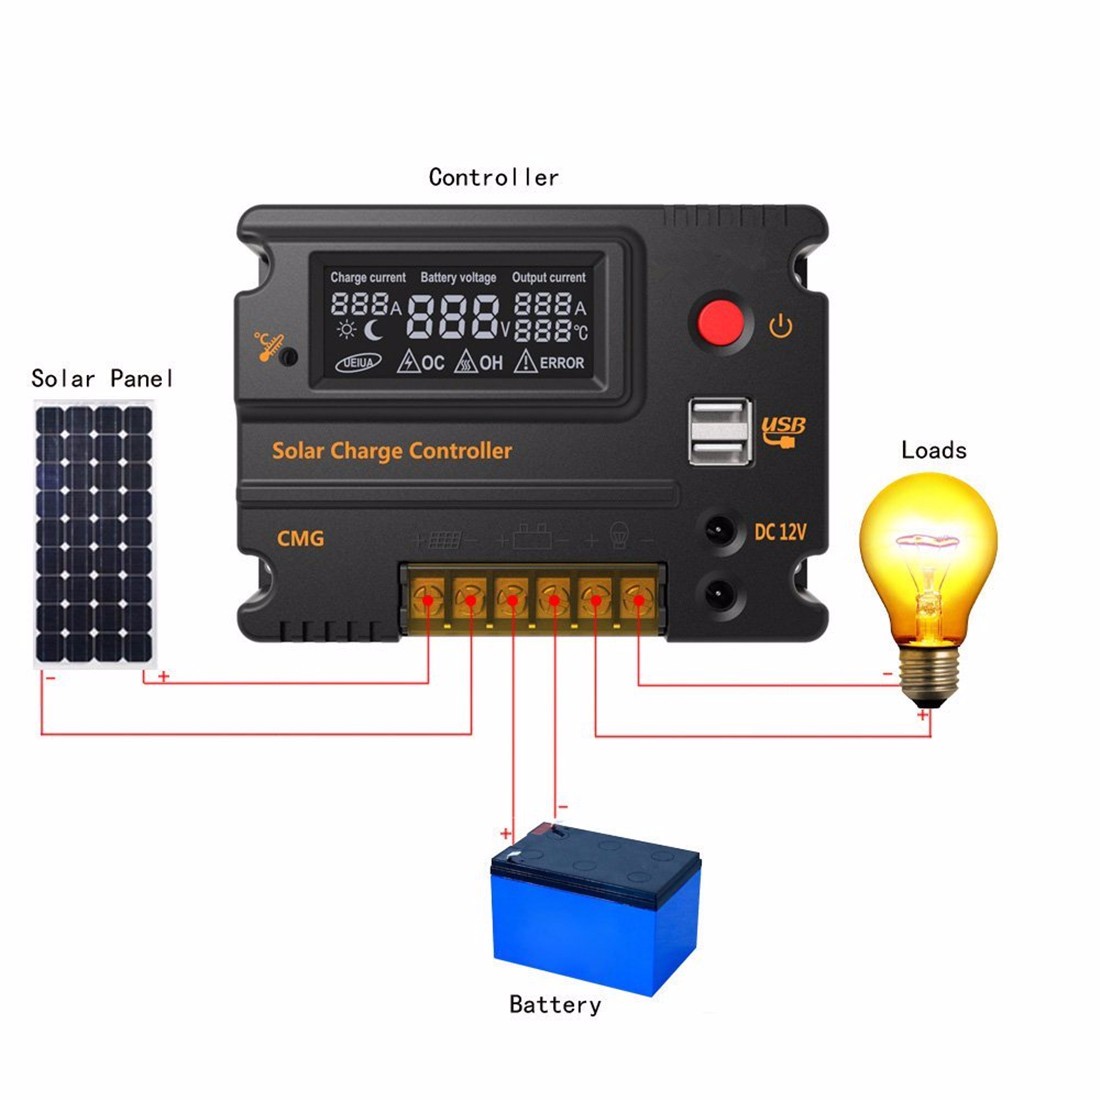 CMG-2420-20A-12V-24V-LCD-Display-PWM-Solar-Panel-Regulator-Charge-Controller-with-USB-Port-1071734-2